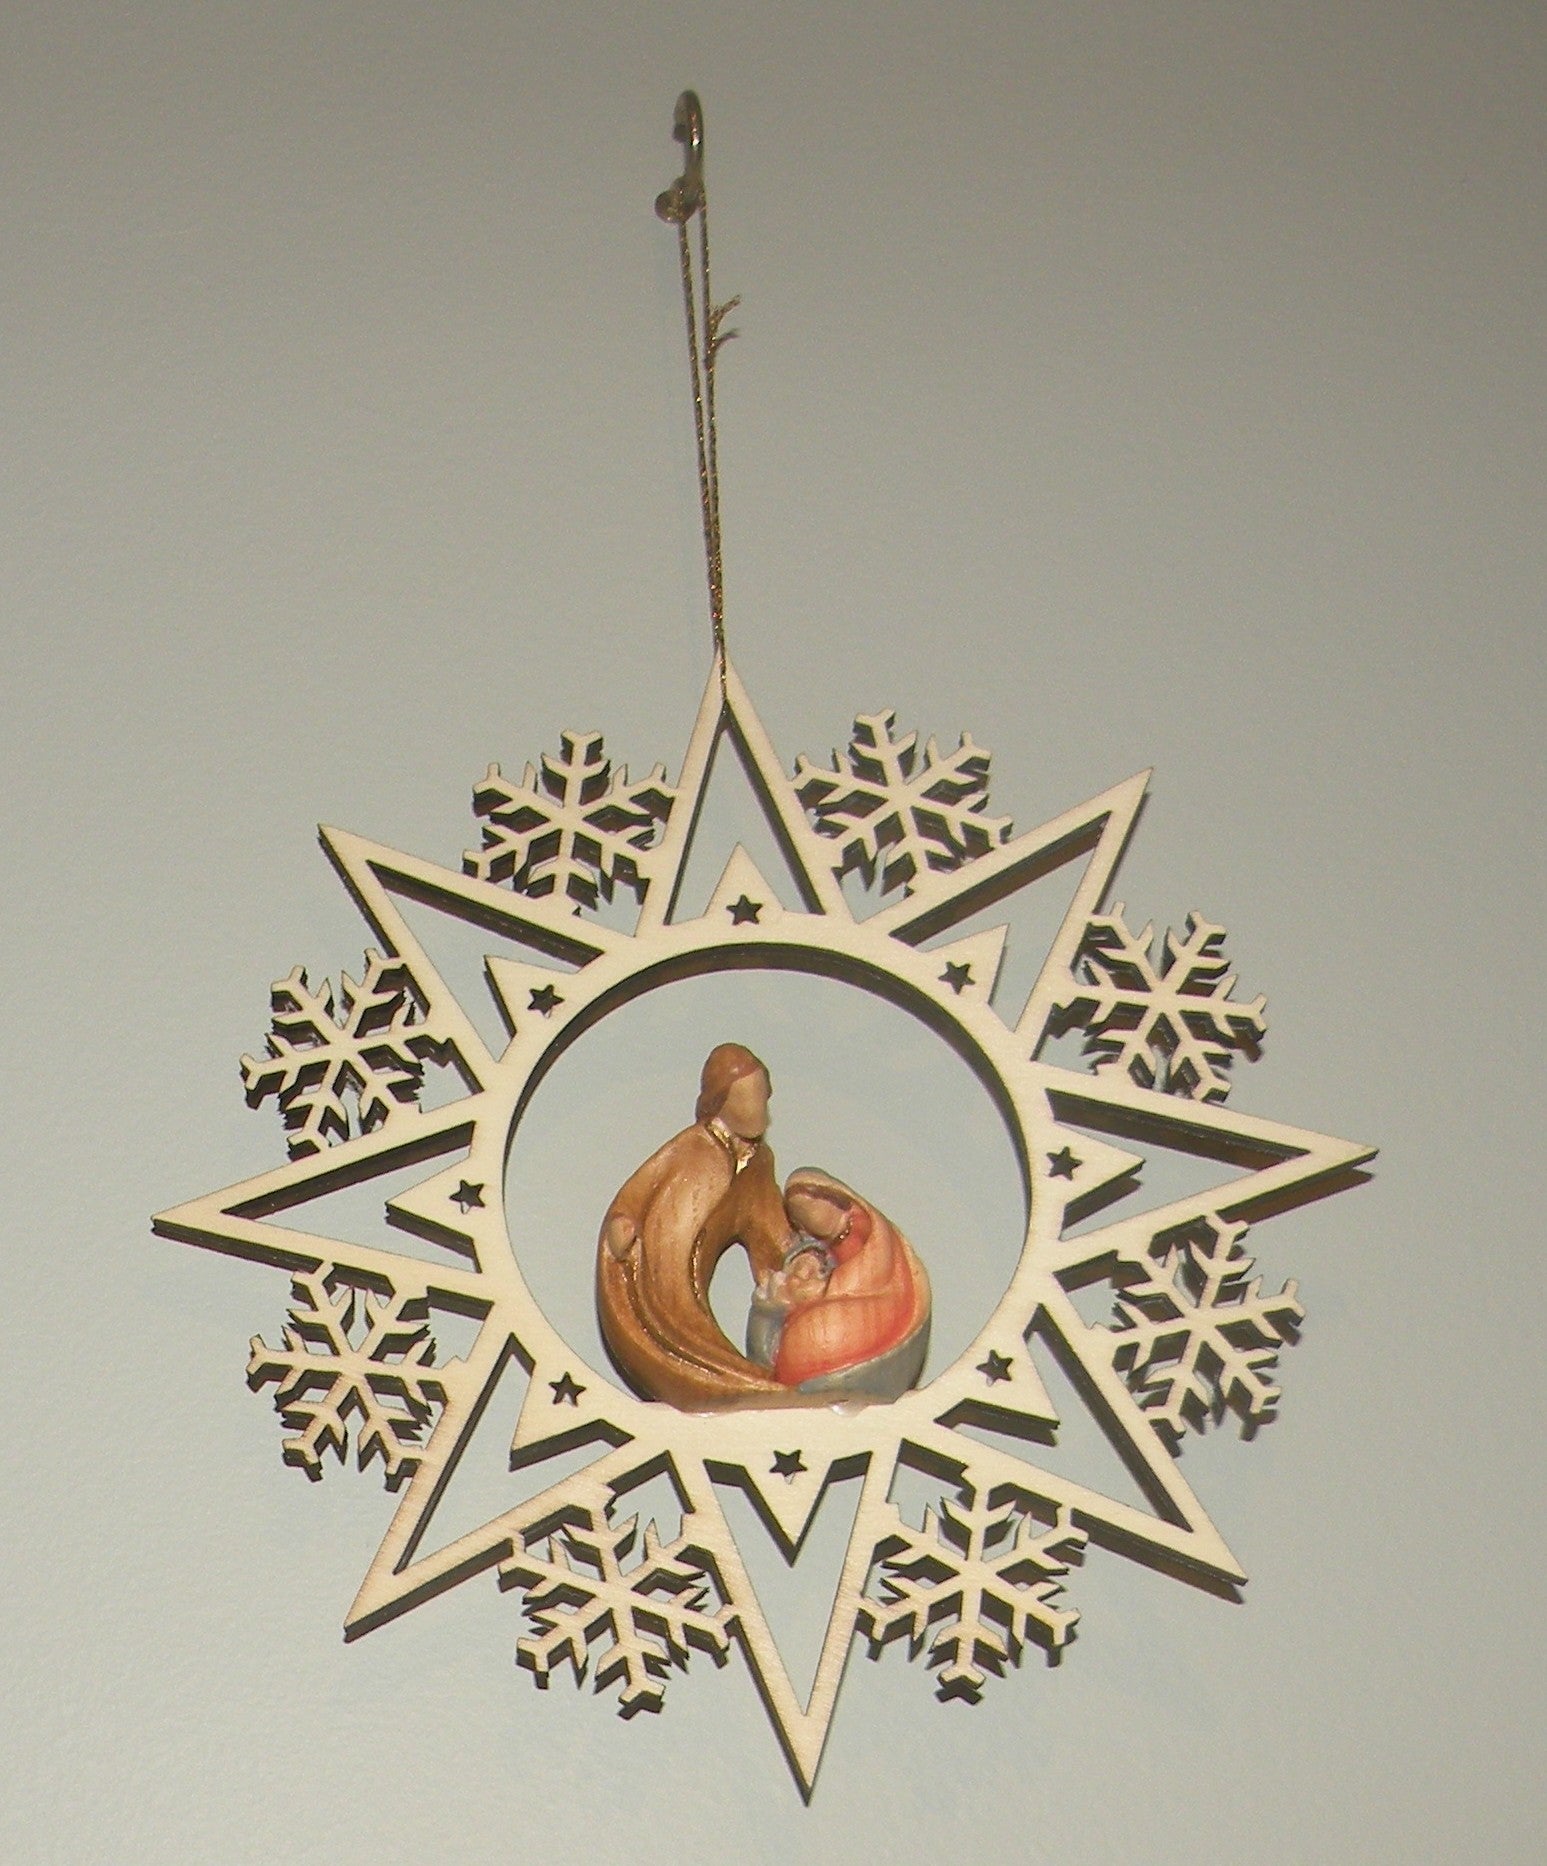 Holy Family 2000 on the star with snowflakes - 08041